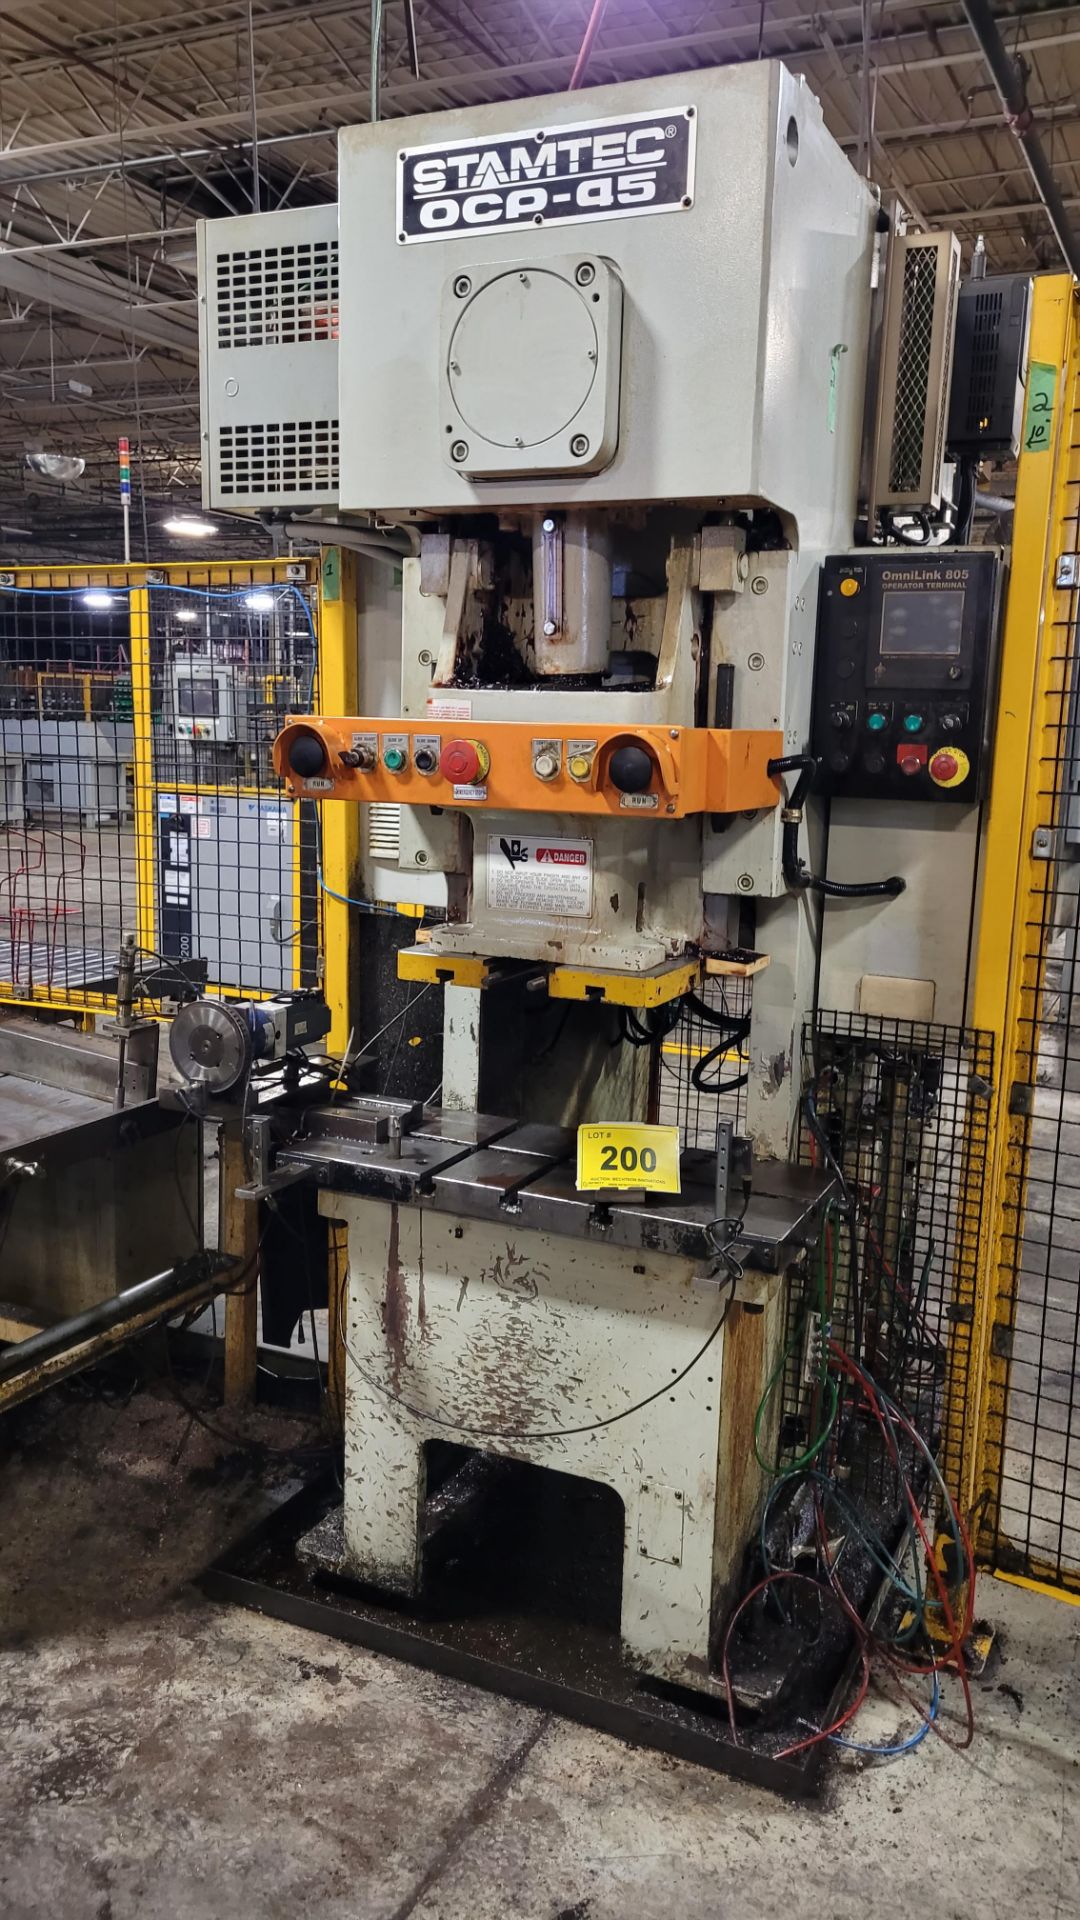 PUNCH PRESS CELL W/ STAMTEC OCP-45 GAP FRAME PUNCH PRESS, OMNILINK 805 CONTROLLER, SAFETY